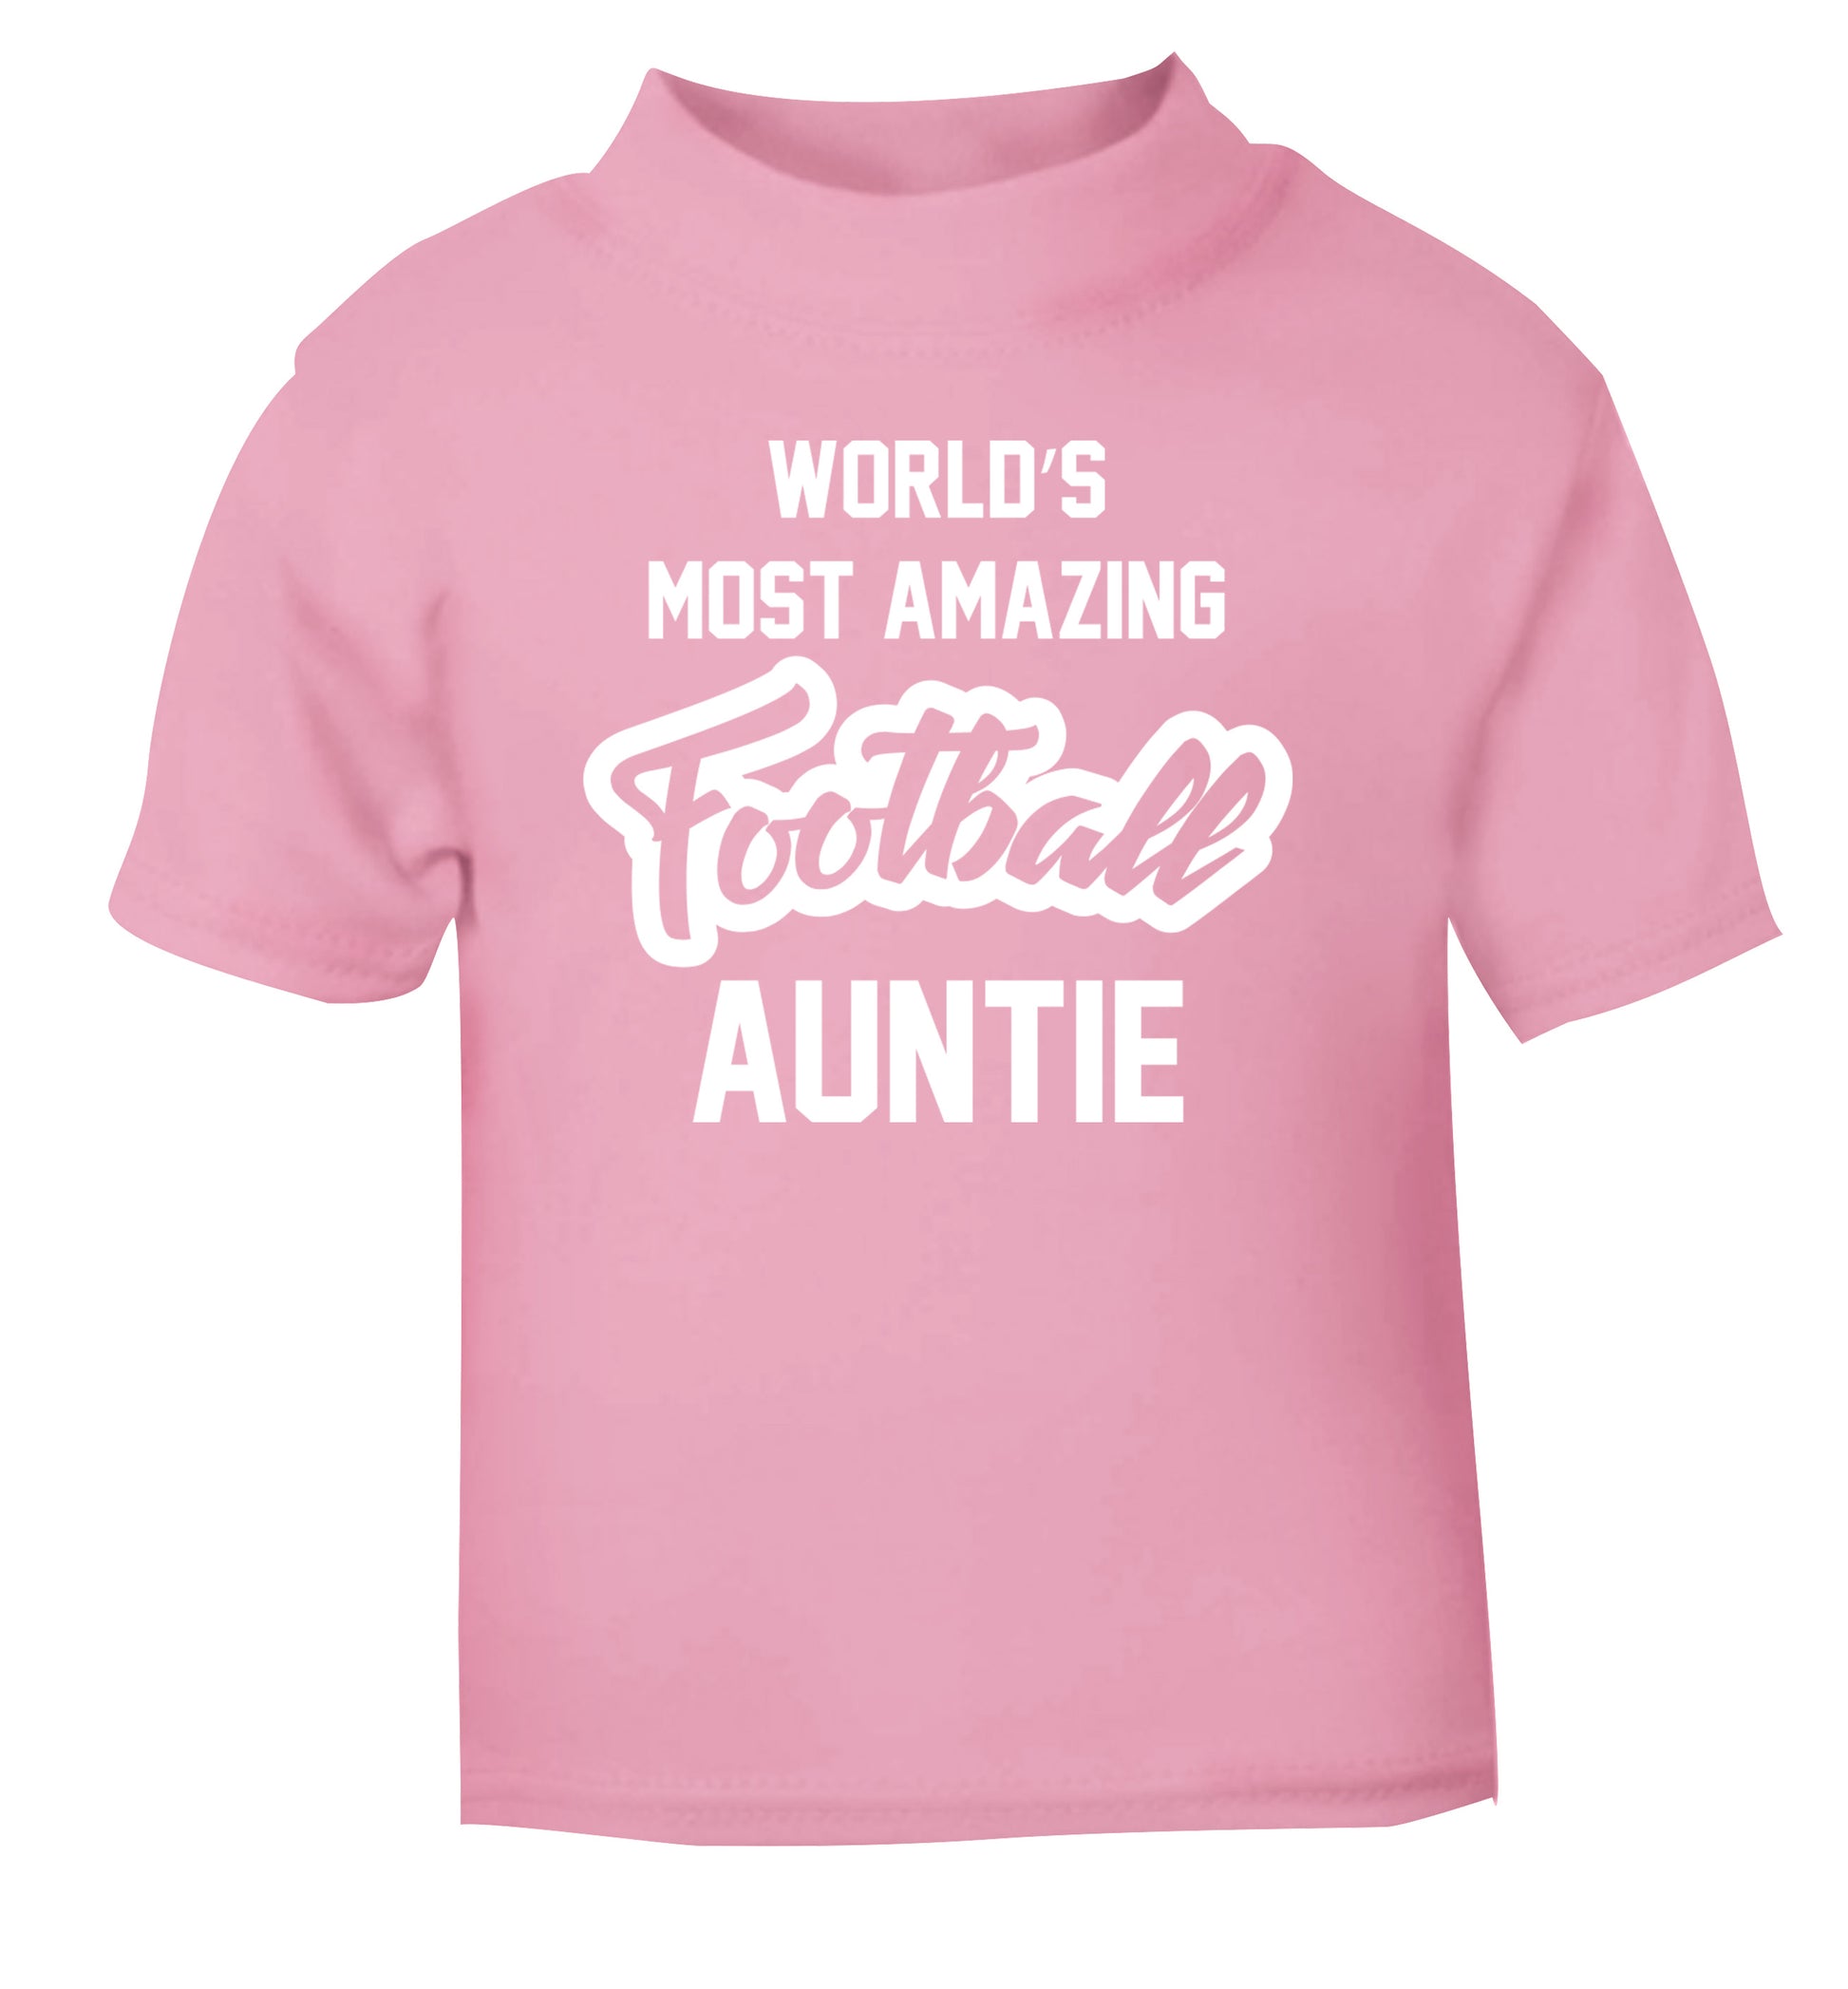 Worlds most amazing football auntie light pink Baby Toddler Tshirt 2 Years